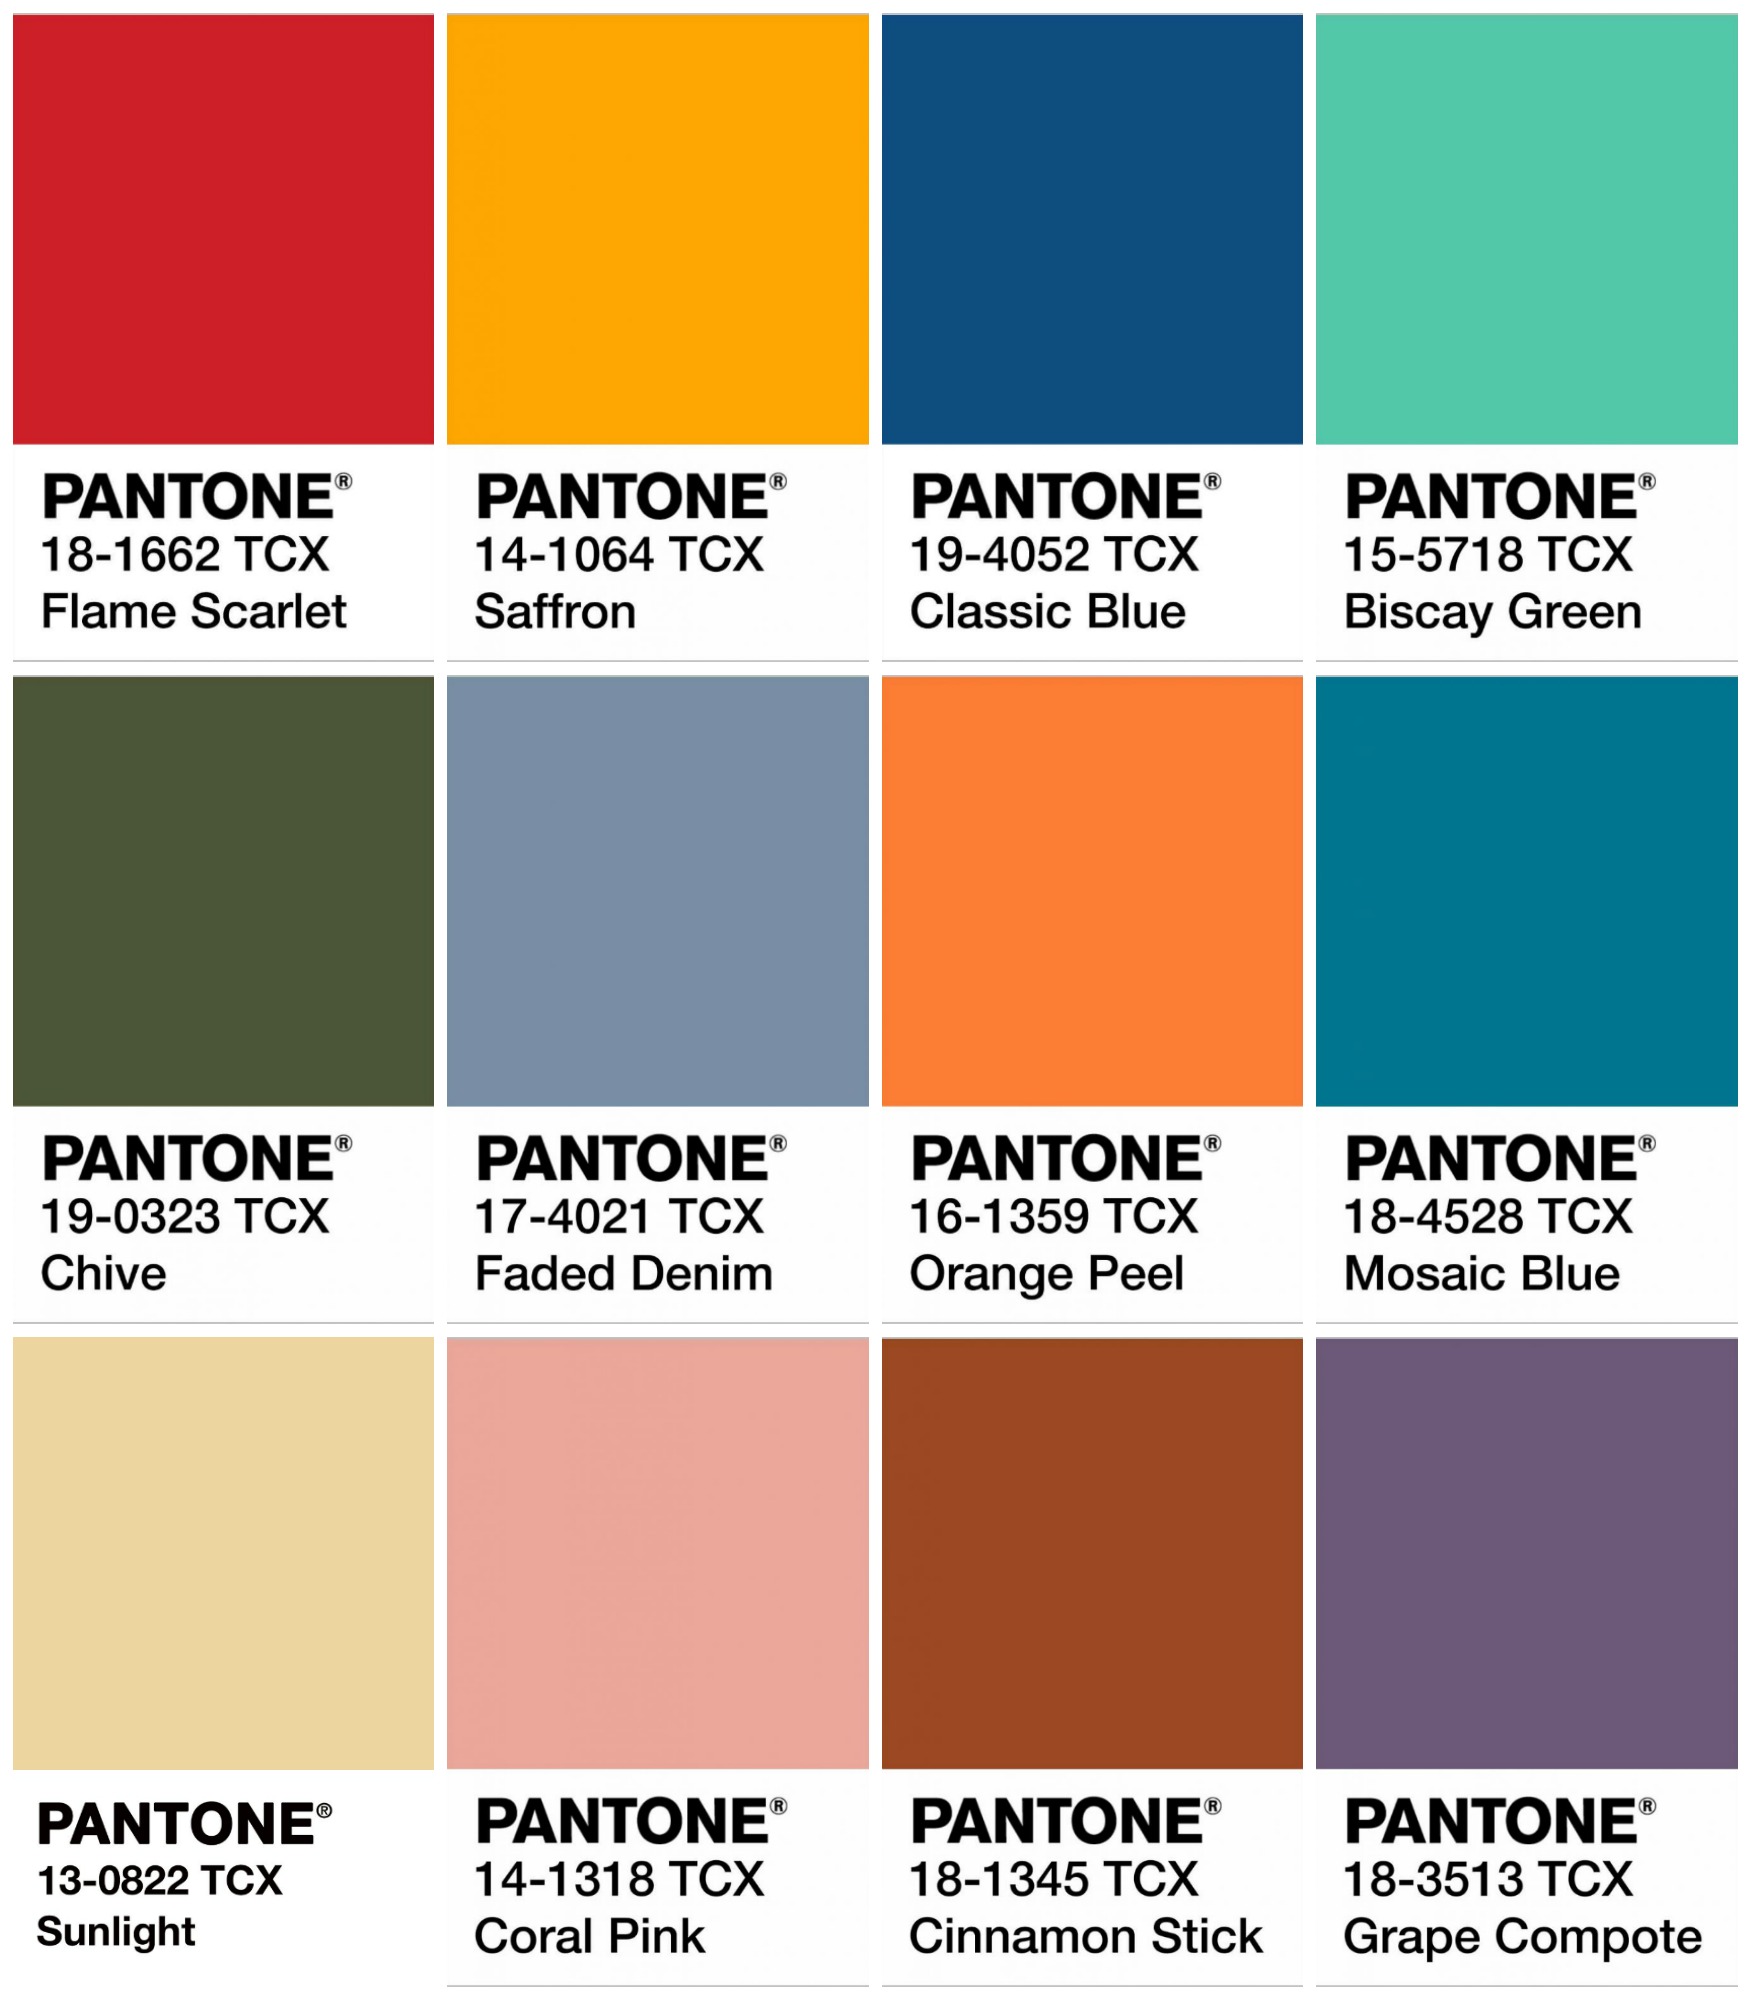 How to Wear Pantone’s Color of the Year